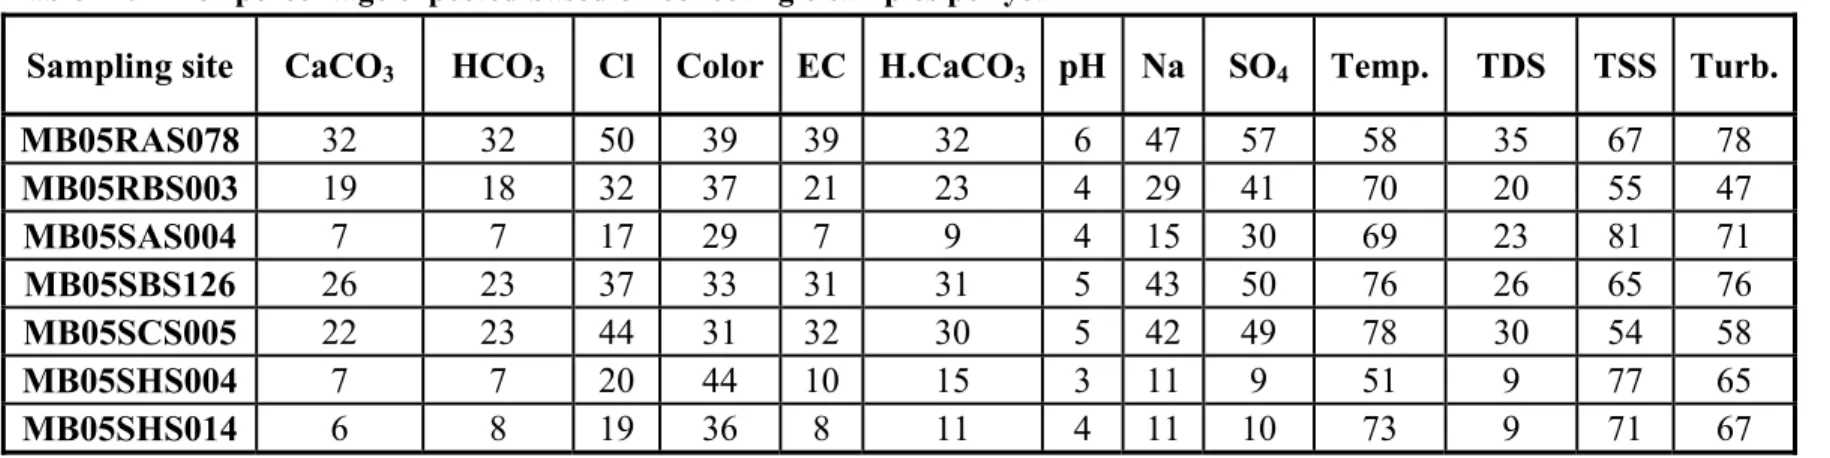 Table 11. Error percentage expected based on collecting 6 samples per year  